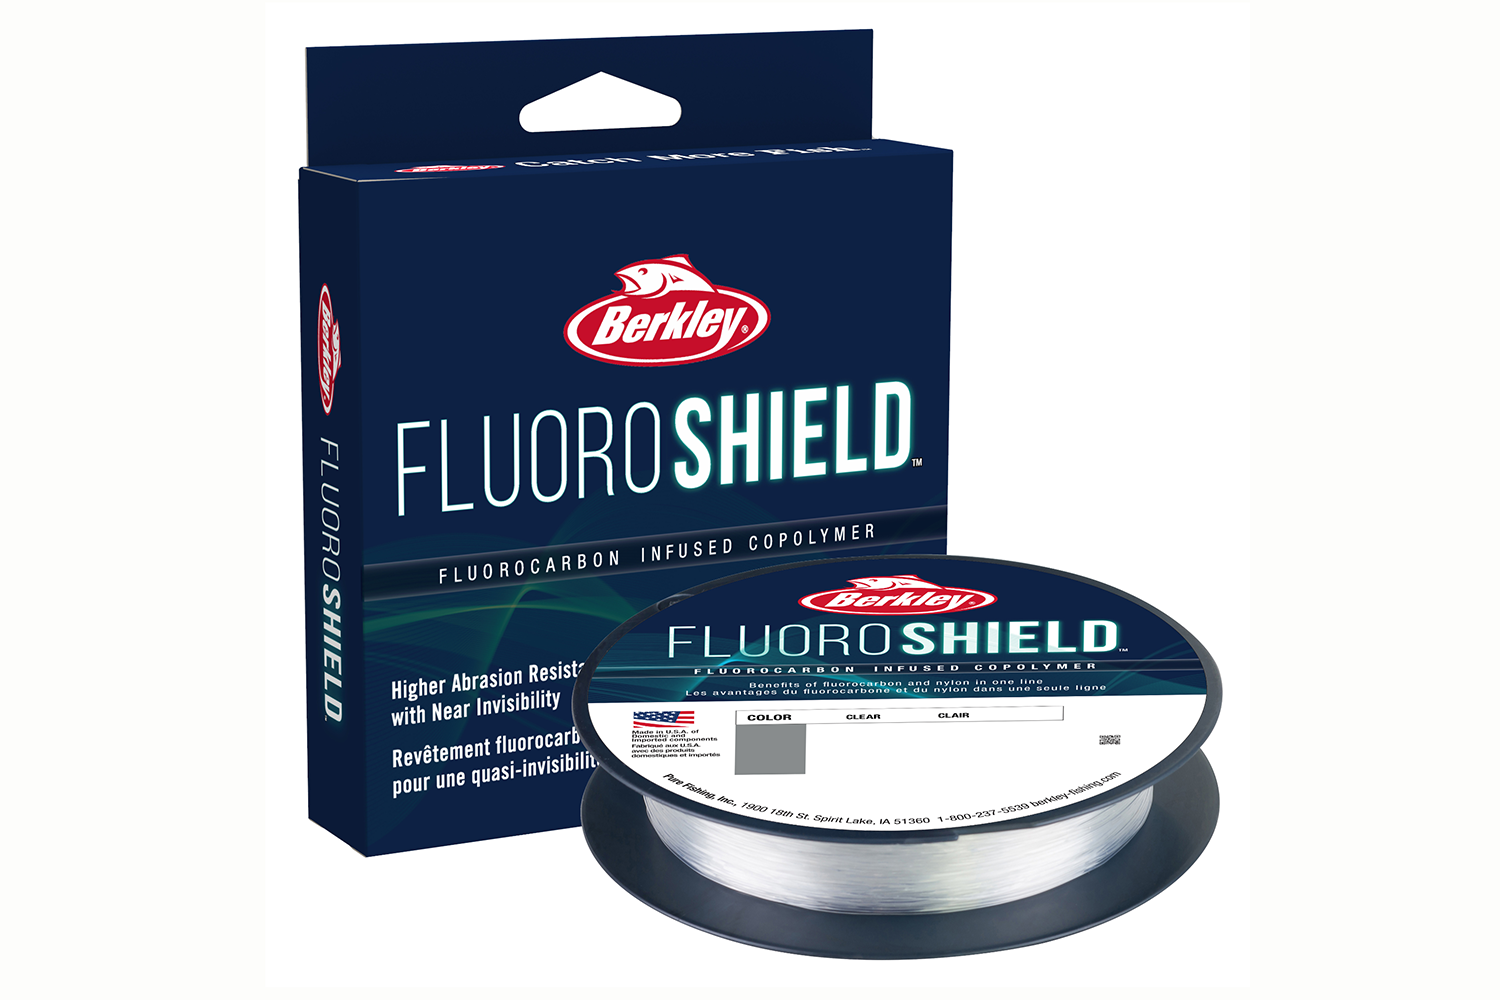 <p><b>Berkley FluoroShield |</b></p>
<p>Berkley FluoroShield monofilament offers anglers another line they can trust by combining the manageability of monofilament that many of them rely on with the abrasion resistance of fluorocarbon. Its refractive index is like that of fluorocarbon making it less visible to fish. Similar to monofilament, FluoroShield has a near neutral buoyancy, making it idea for fishing crankbaits and dropshot rigs. Available September 2020.</p>
<p><a href=